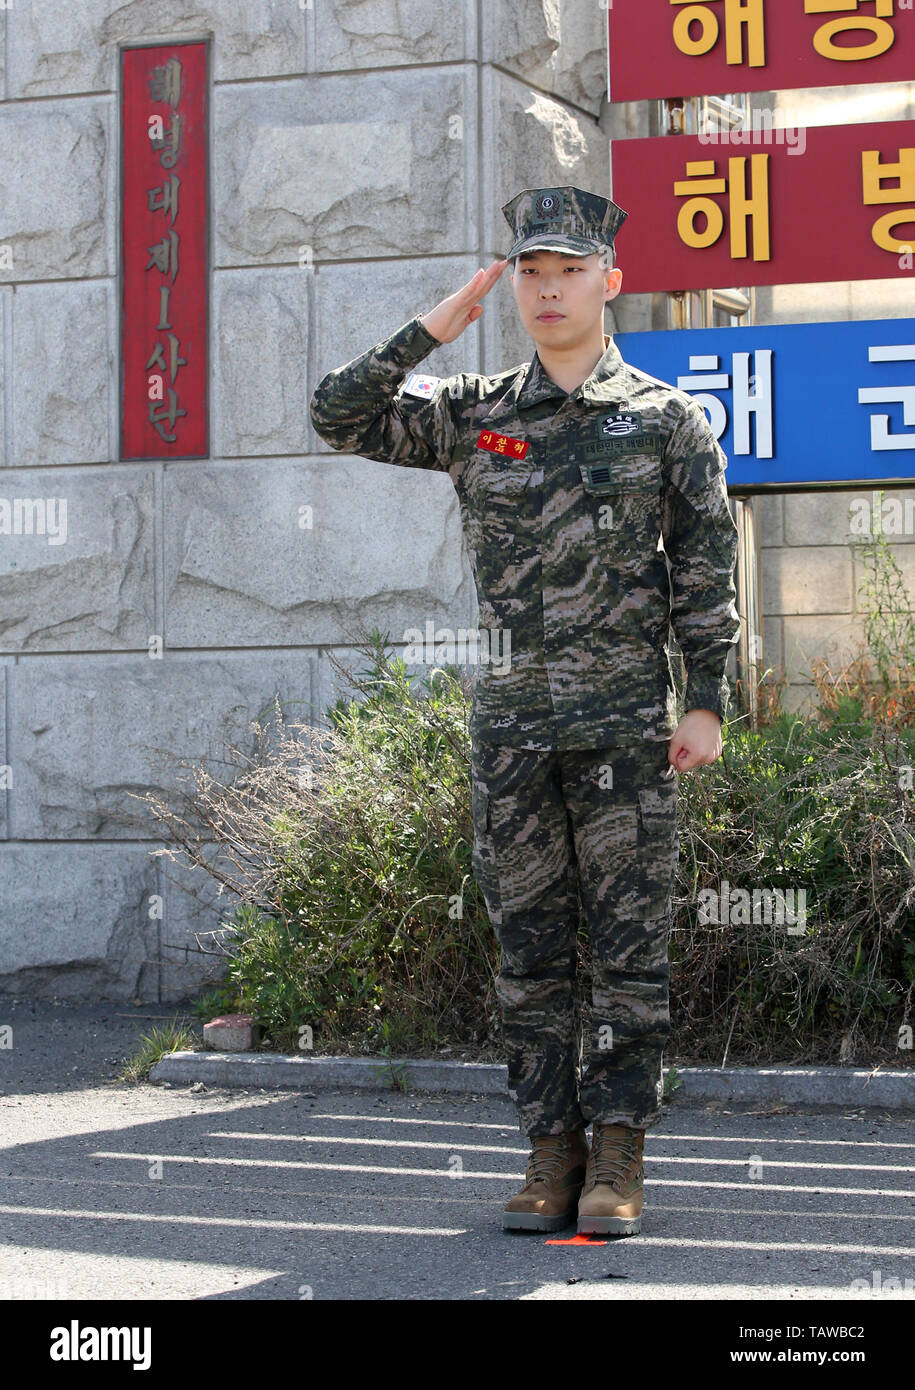 29th May, 2019. Singer Lee Chan-hyuk discharged from military service Lee  Chan-hyuk, a member of South Korean duo Akdong Musician, salutes fans in  front of a military unit in the southeastern city